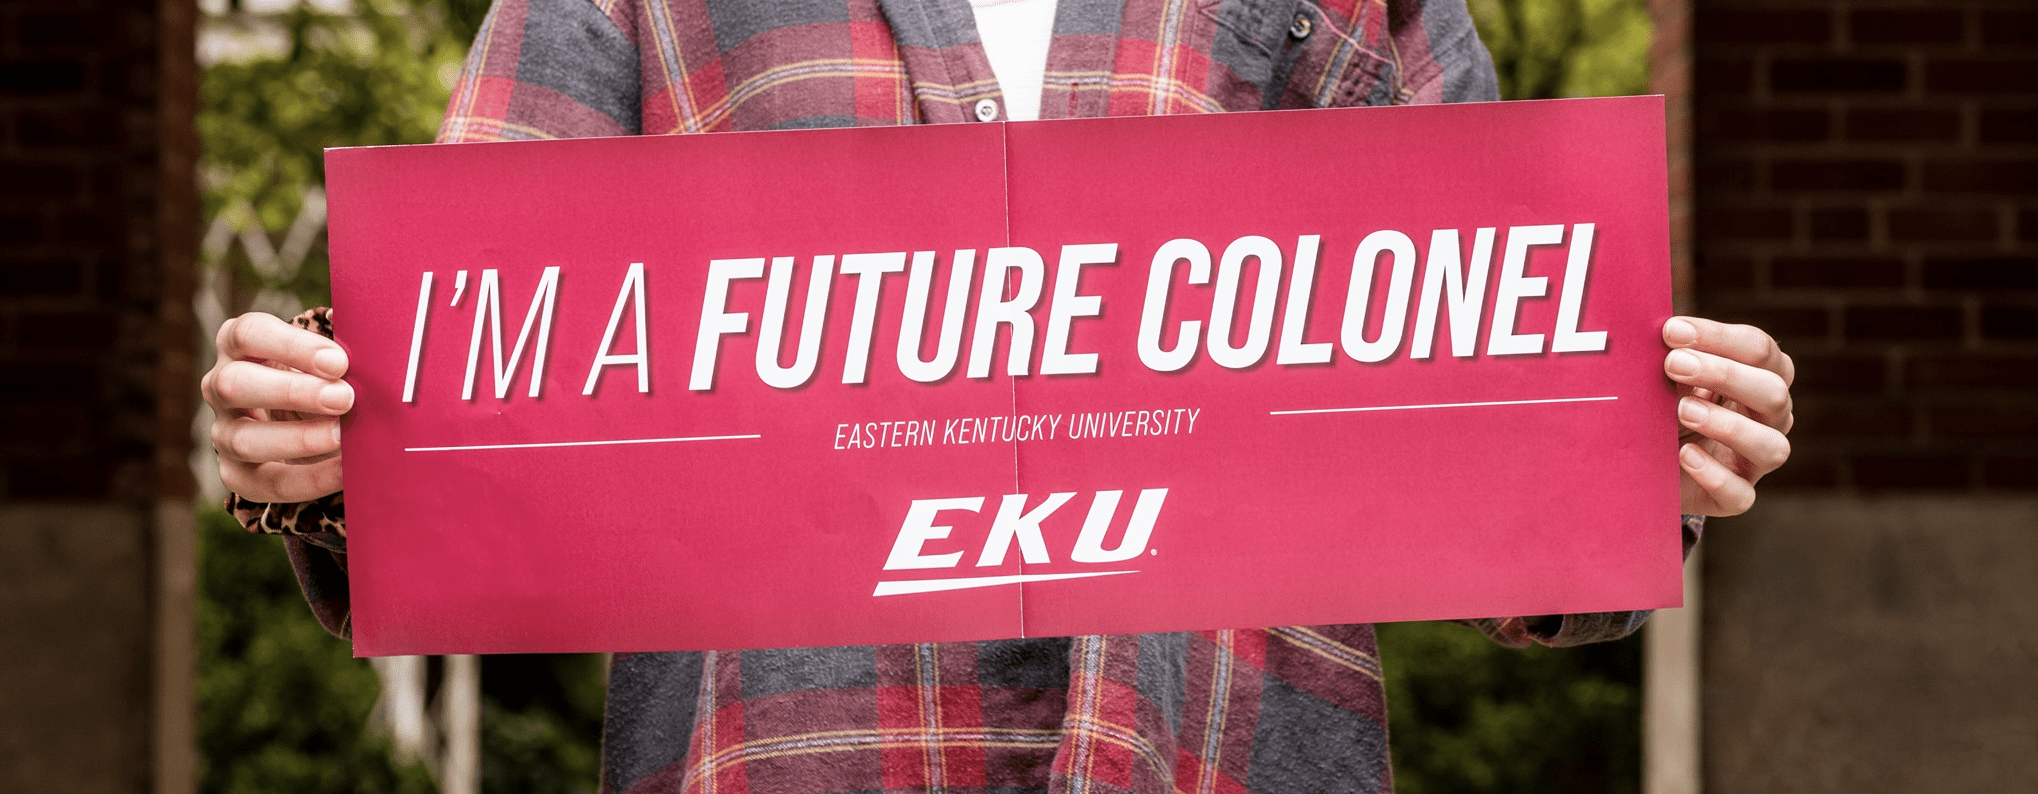 EKU Student Holding a Sign that says I'm a future colonel